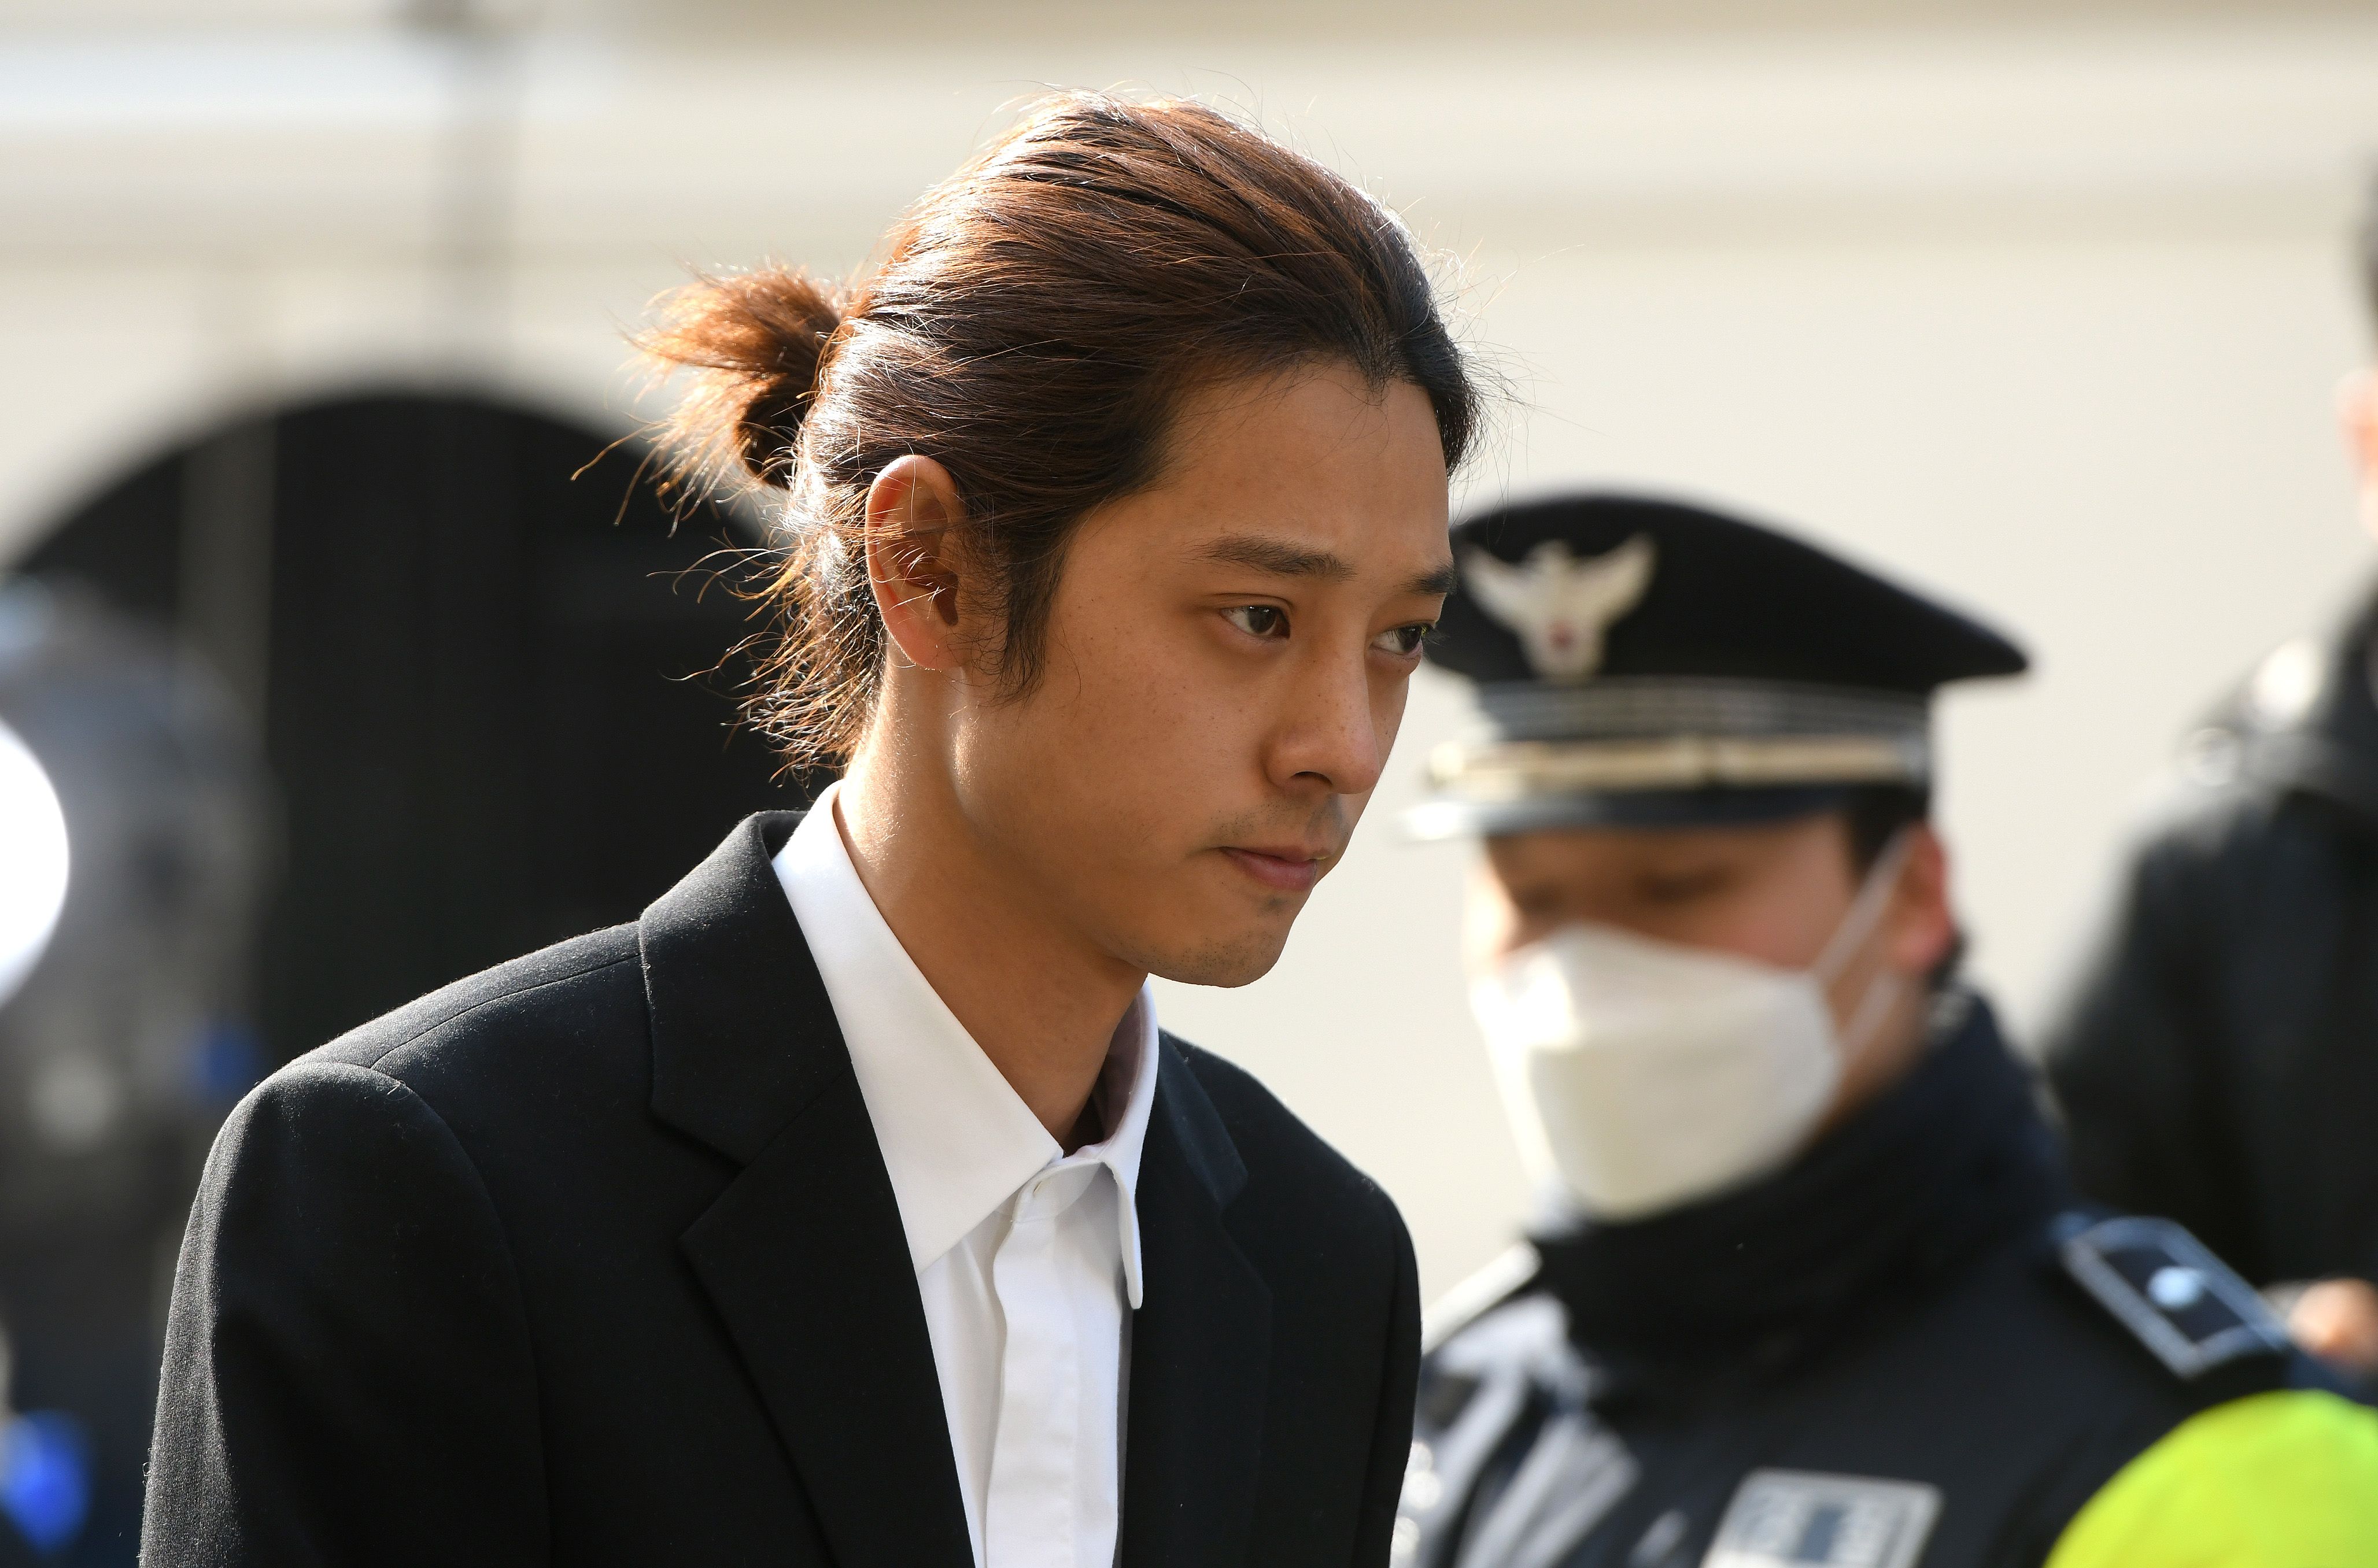 Indian Sleeping Sistar Forces Brather Rap Vedio - K-pop stars Jung Joon-young and Choi Jong-hoon jailed for sexual assault |  CNN